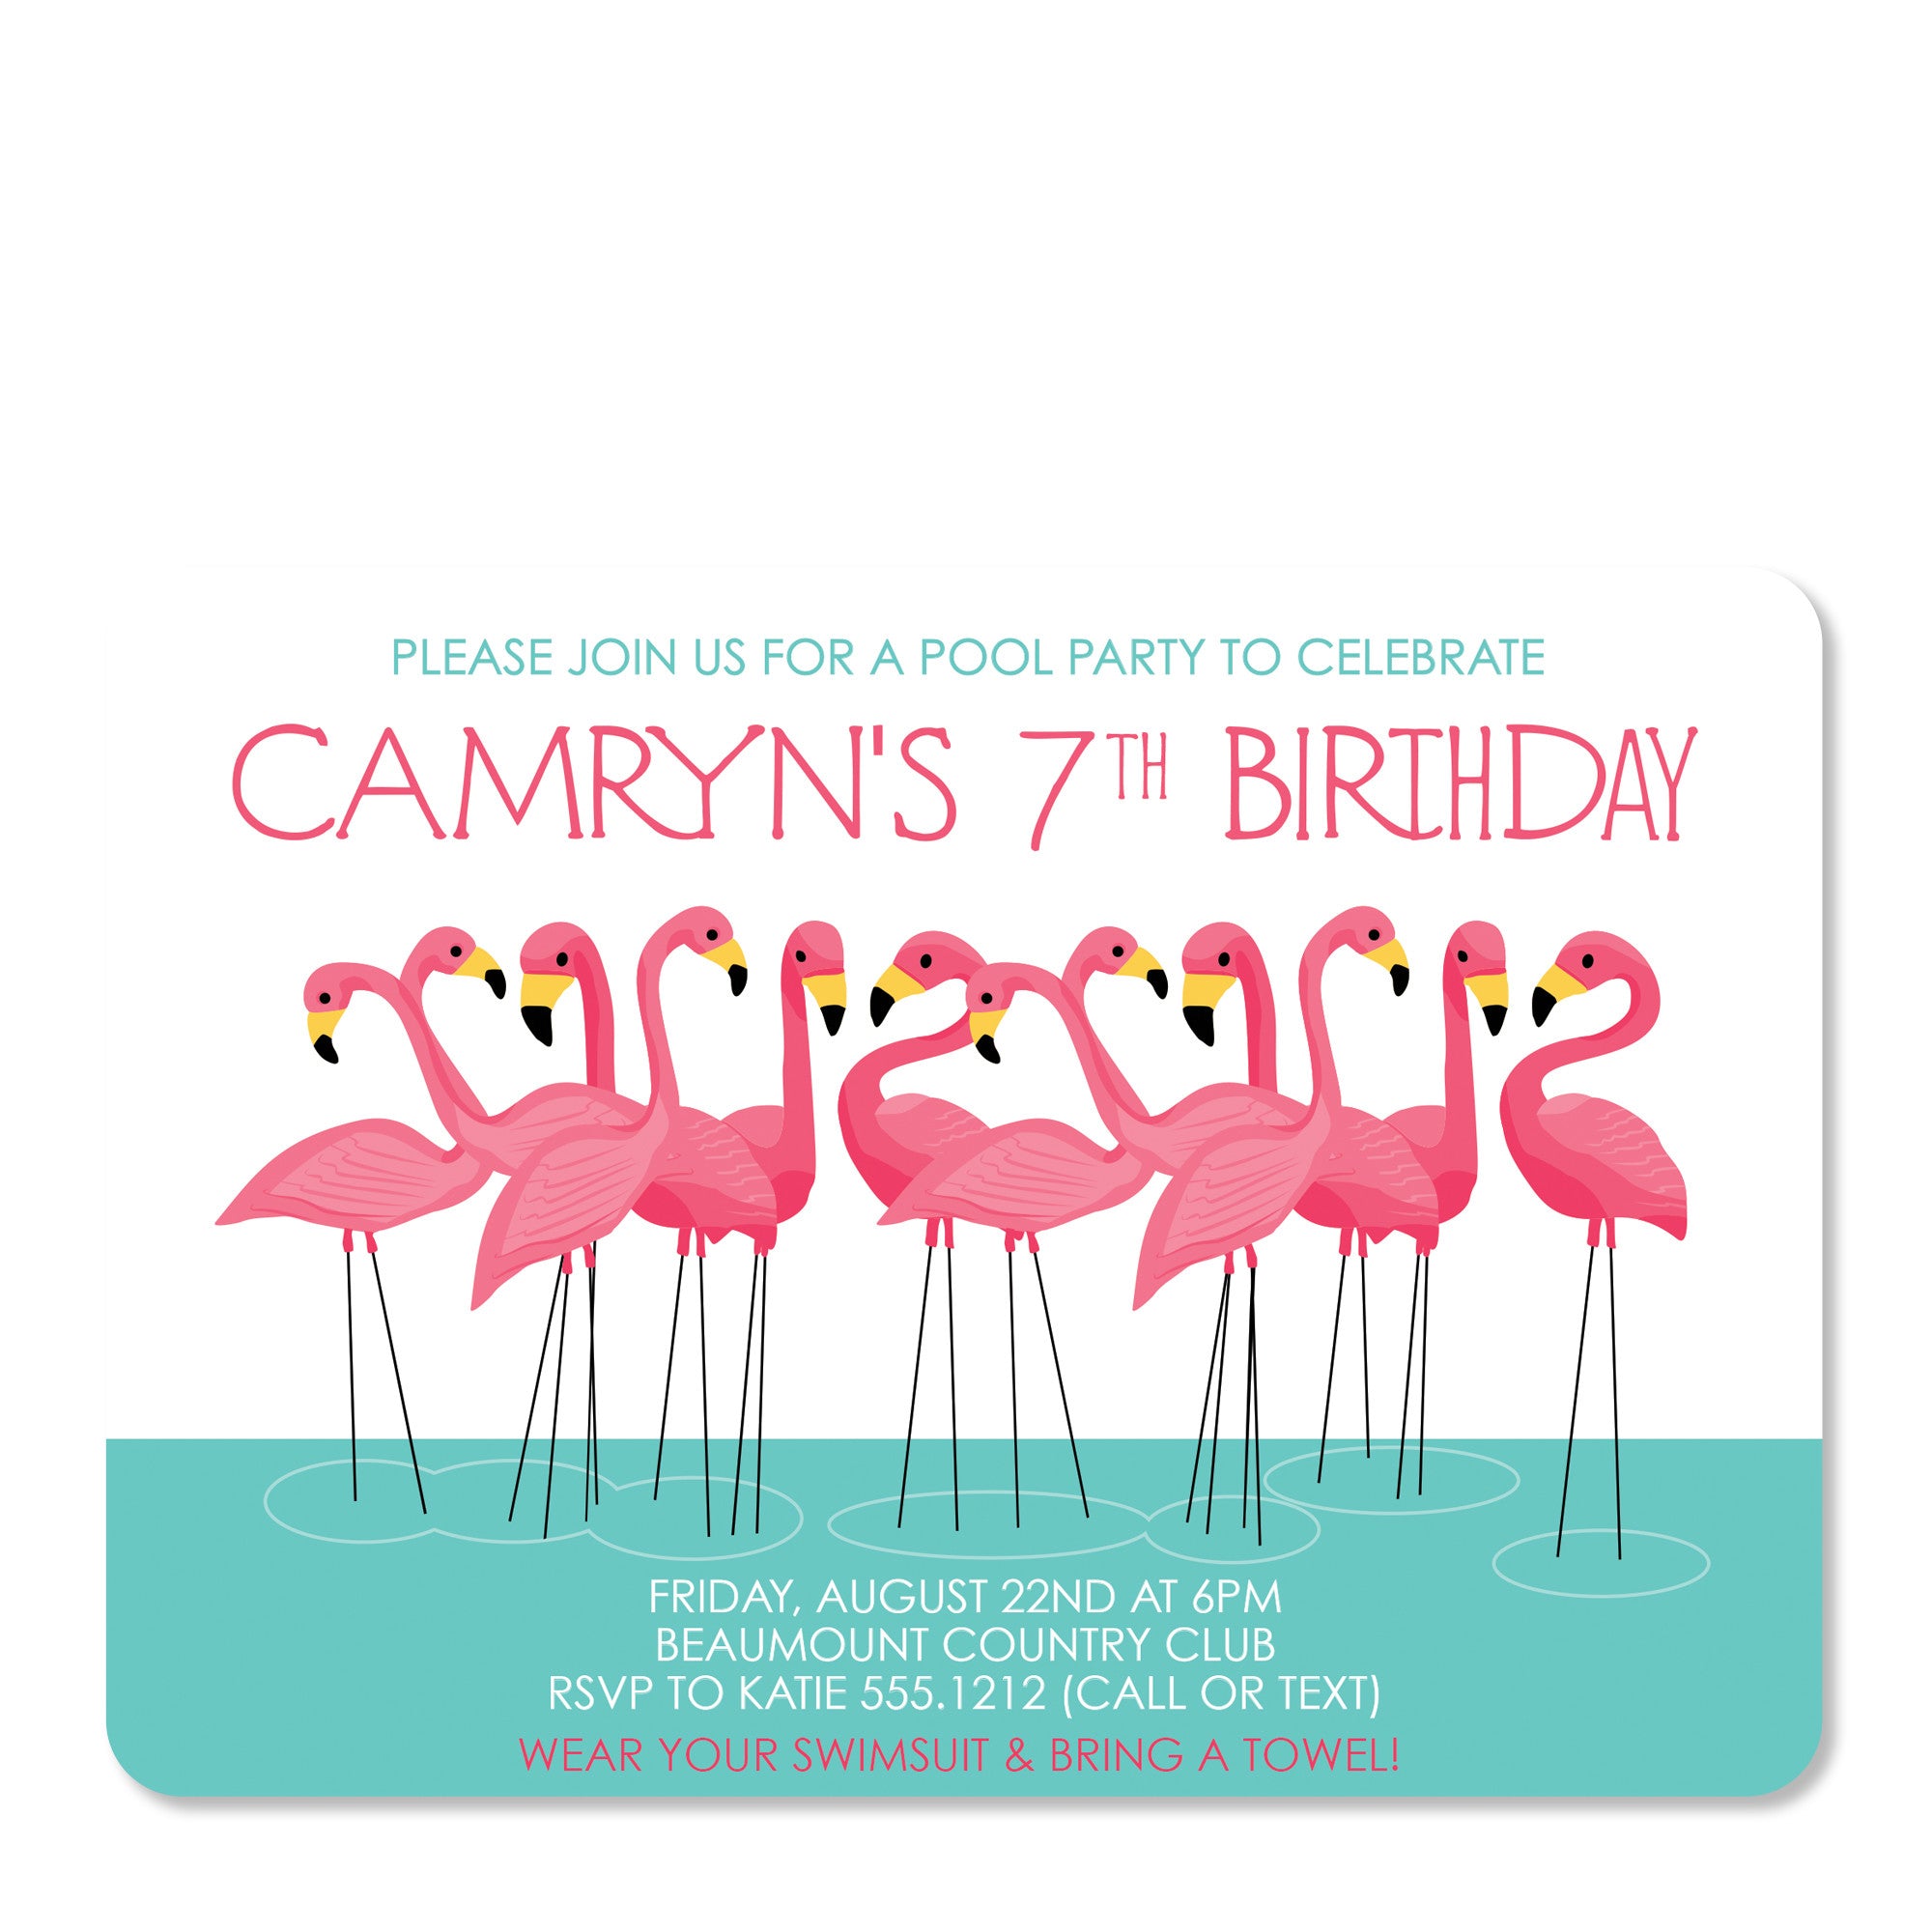 Flamingo Party Birthday Invitation, perfect for a pool party or splash party, printed on heavyweight premium cardstock, from Pipsy.com, front